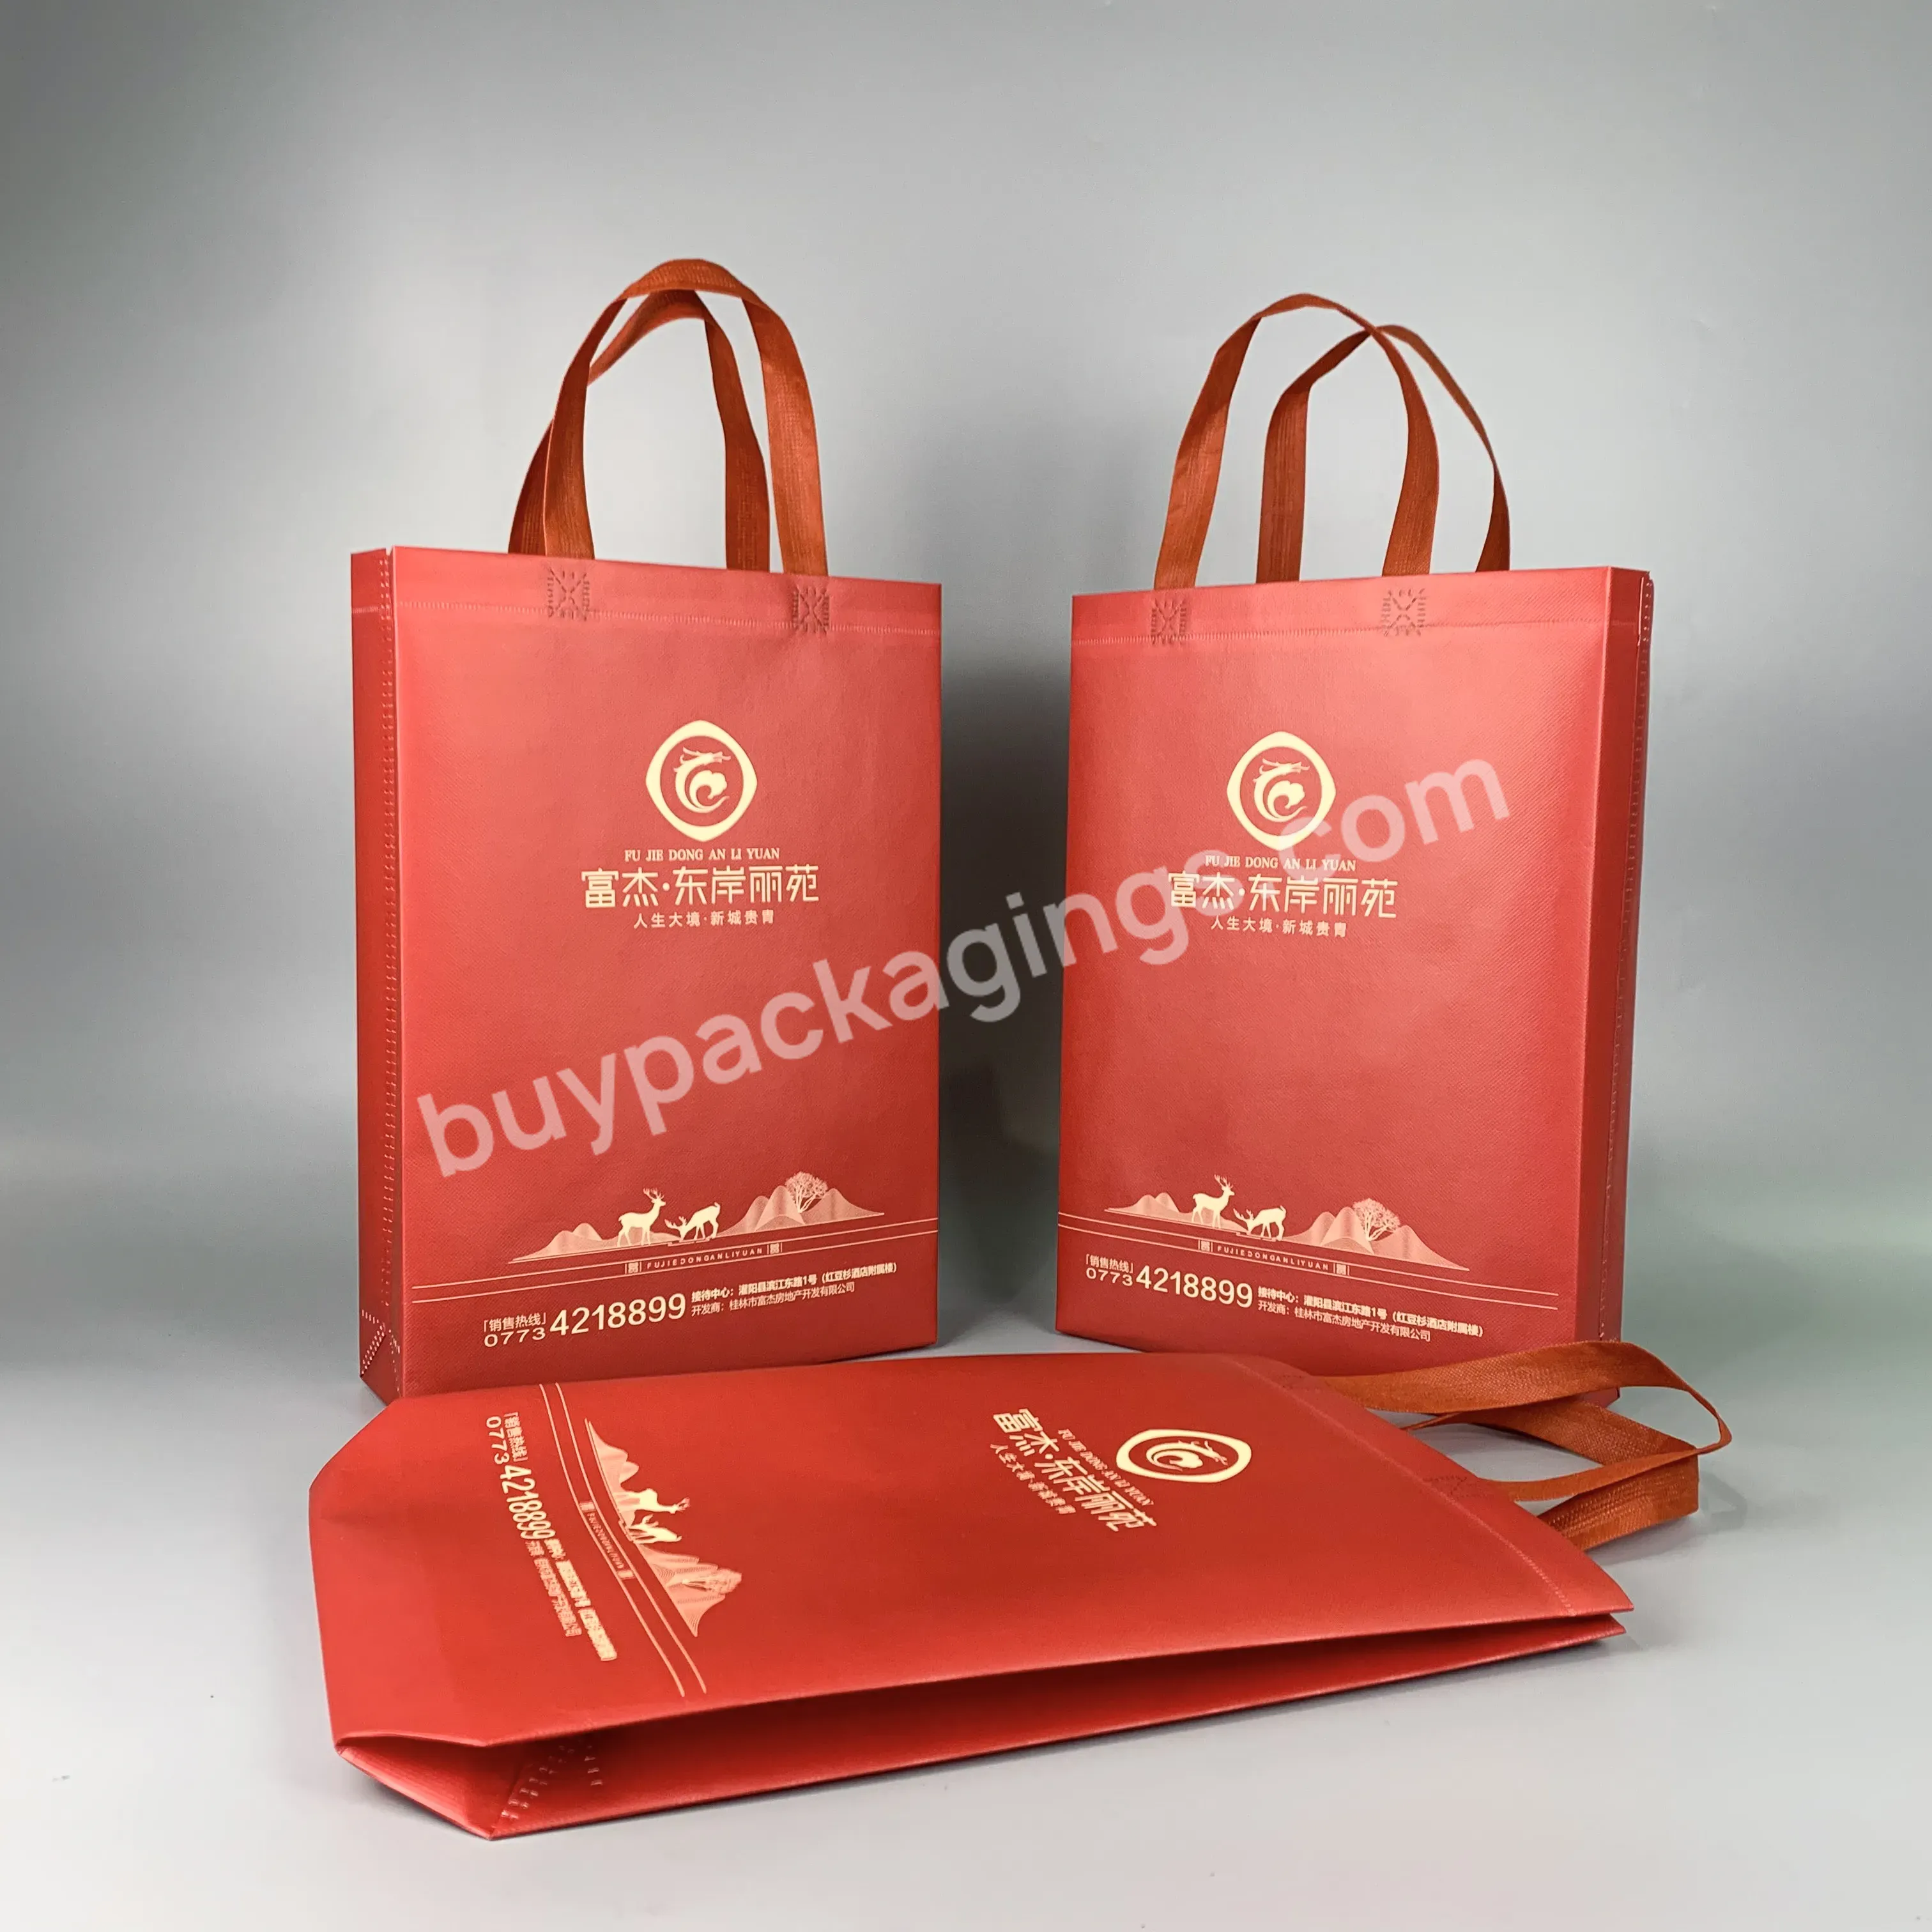 New Design Ecological Recyclable Colorful Waterproof Customized Logo Non Woven Bag For Gift Packing - Buy New Design Ecological Shopping Bag,Recyclable Waterproof Non Woven Bag,Customized Non Woven Bag With Logo.